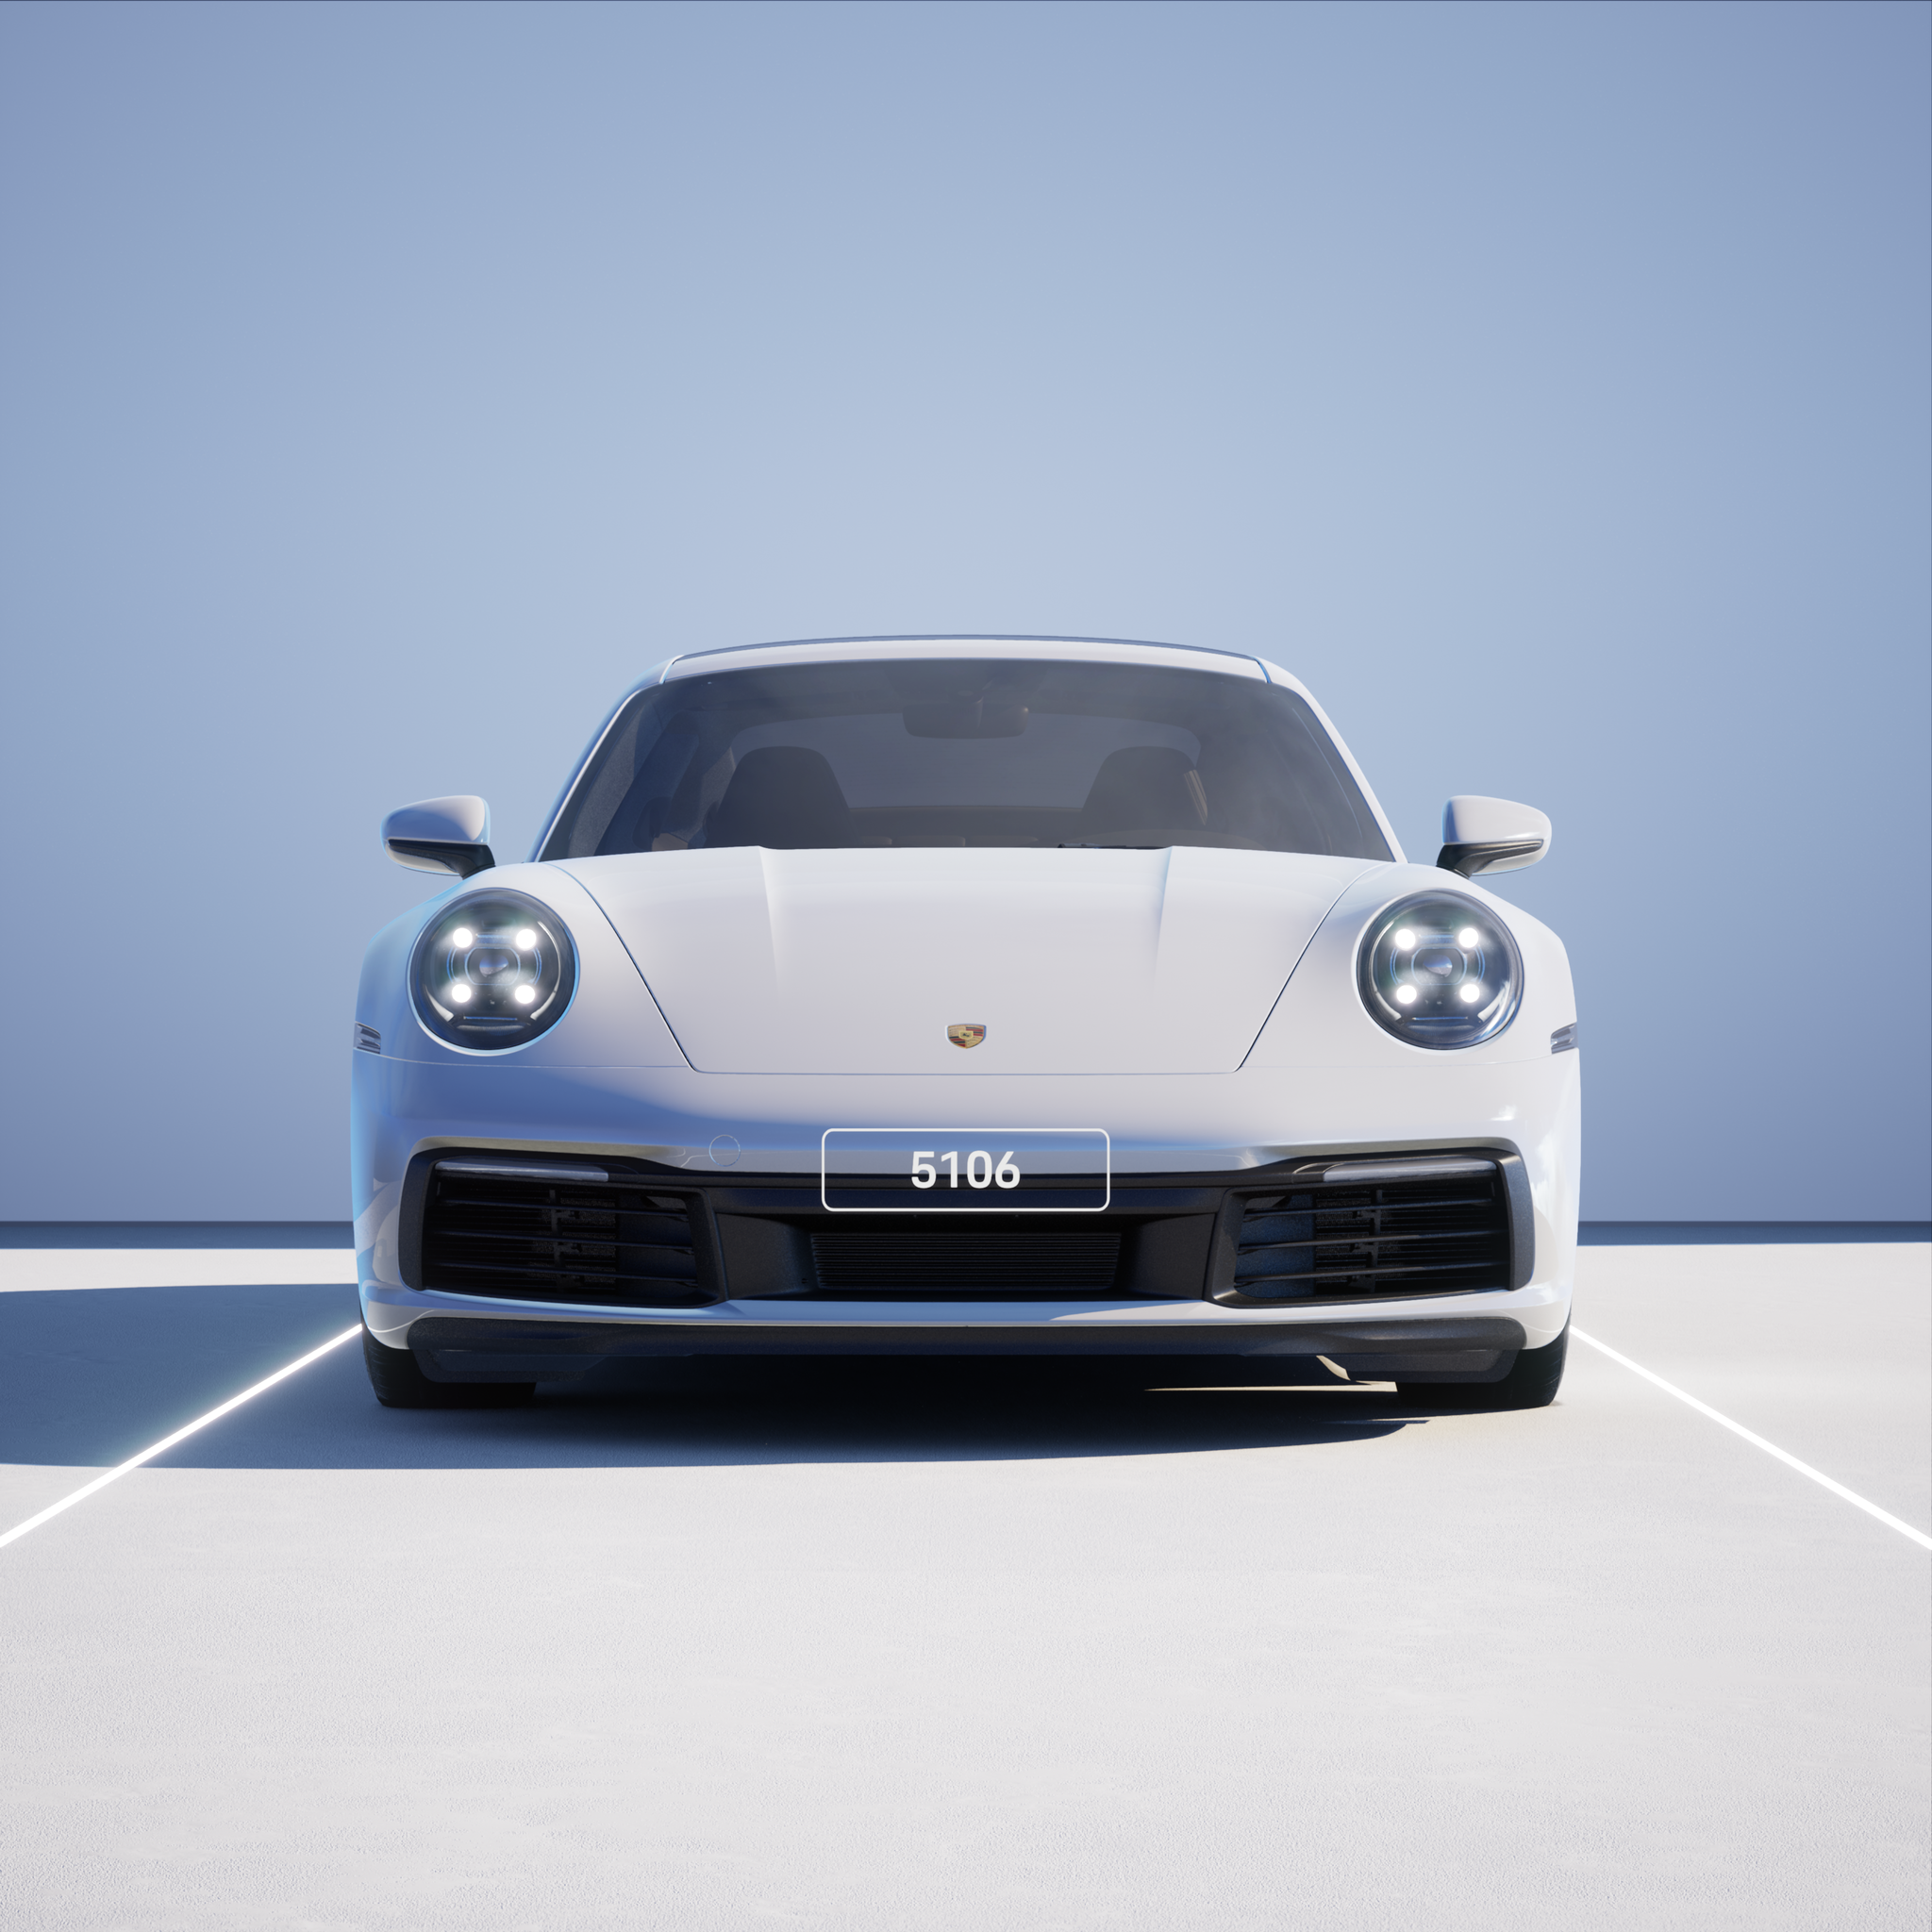 The PORSCHΞ 911 5106 image in phase